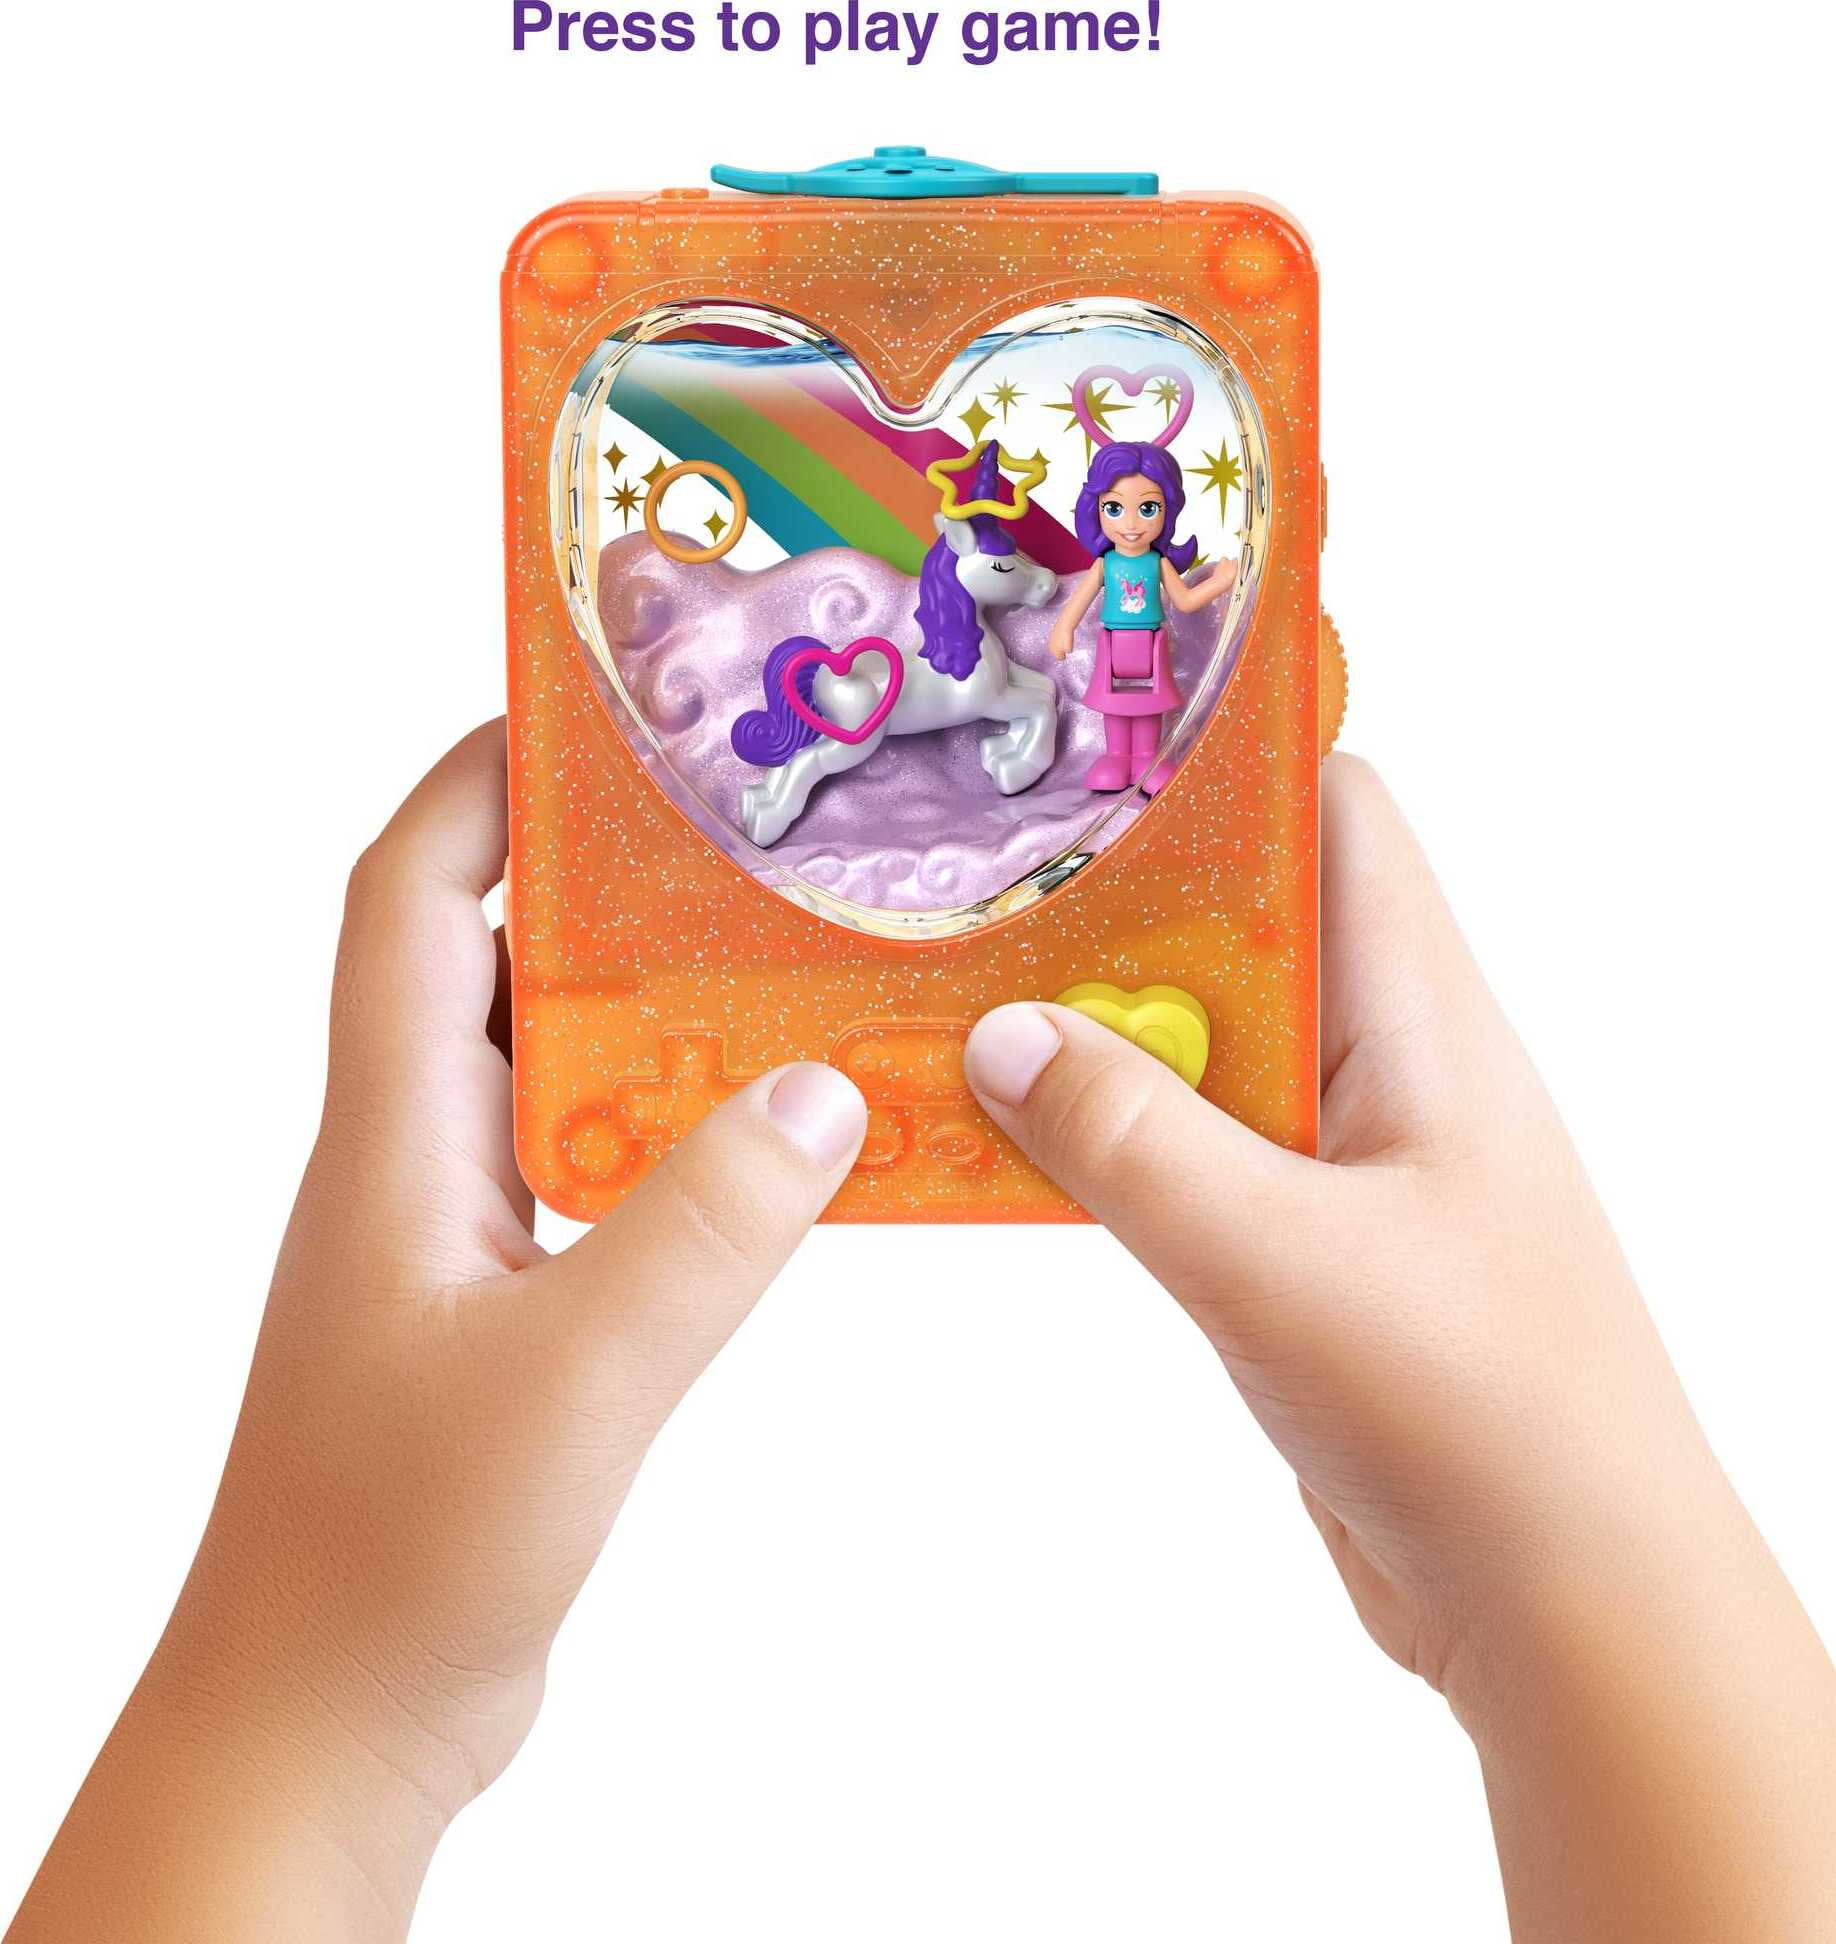 Doll Polly Pocket The Room Of Games And Her Accessories